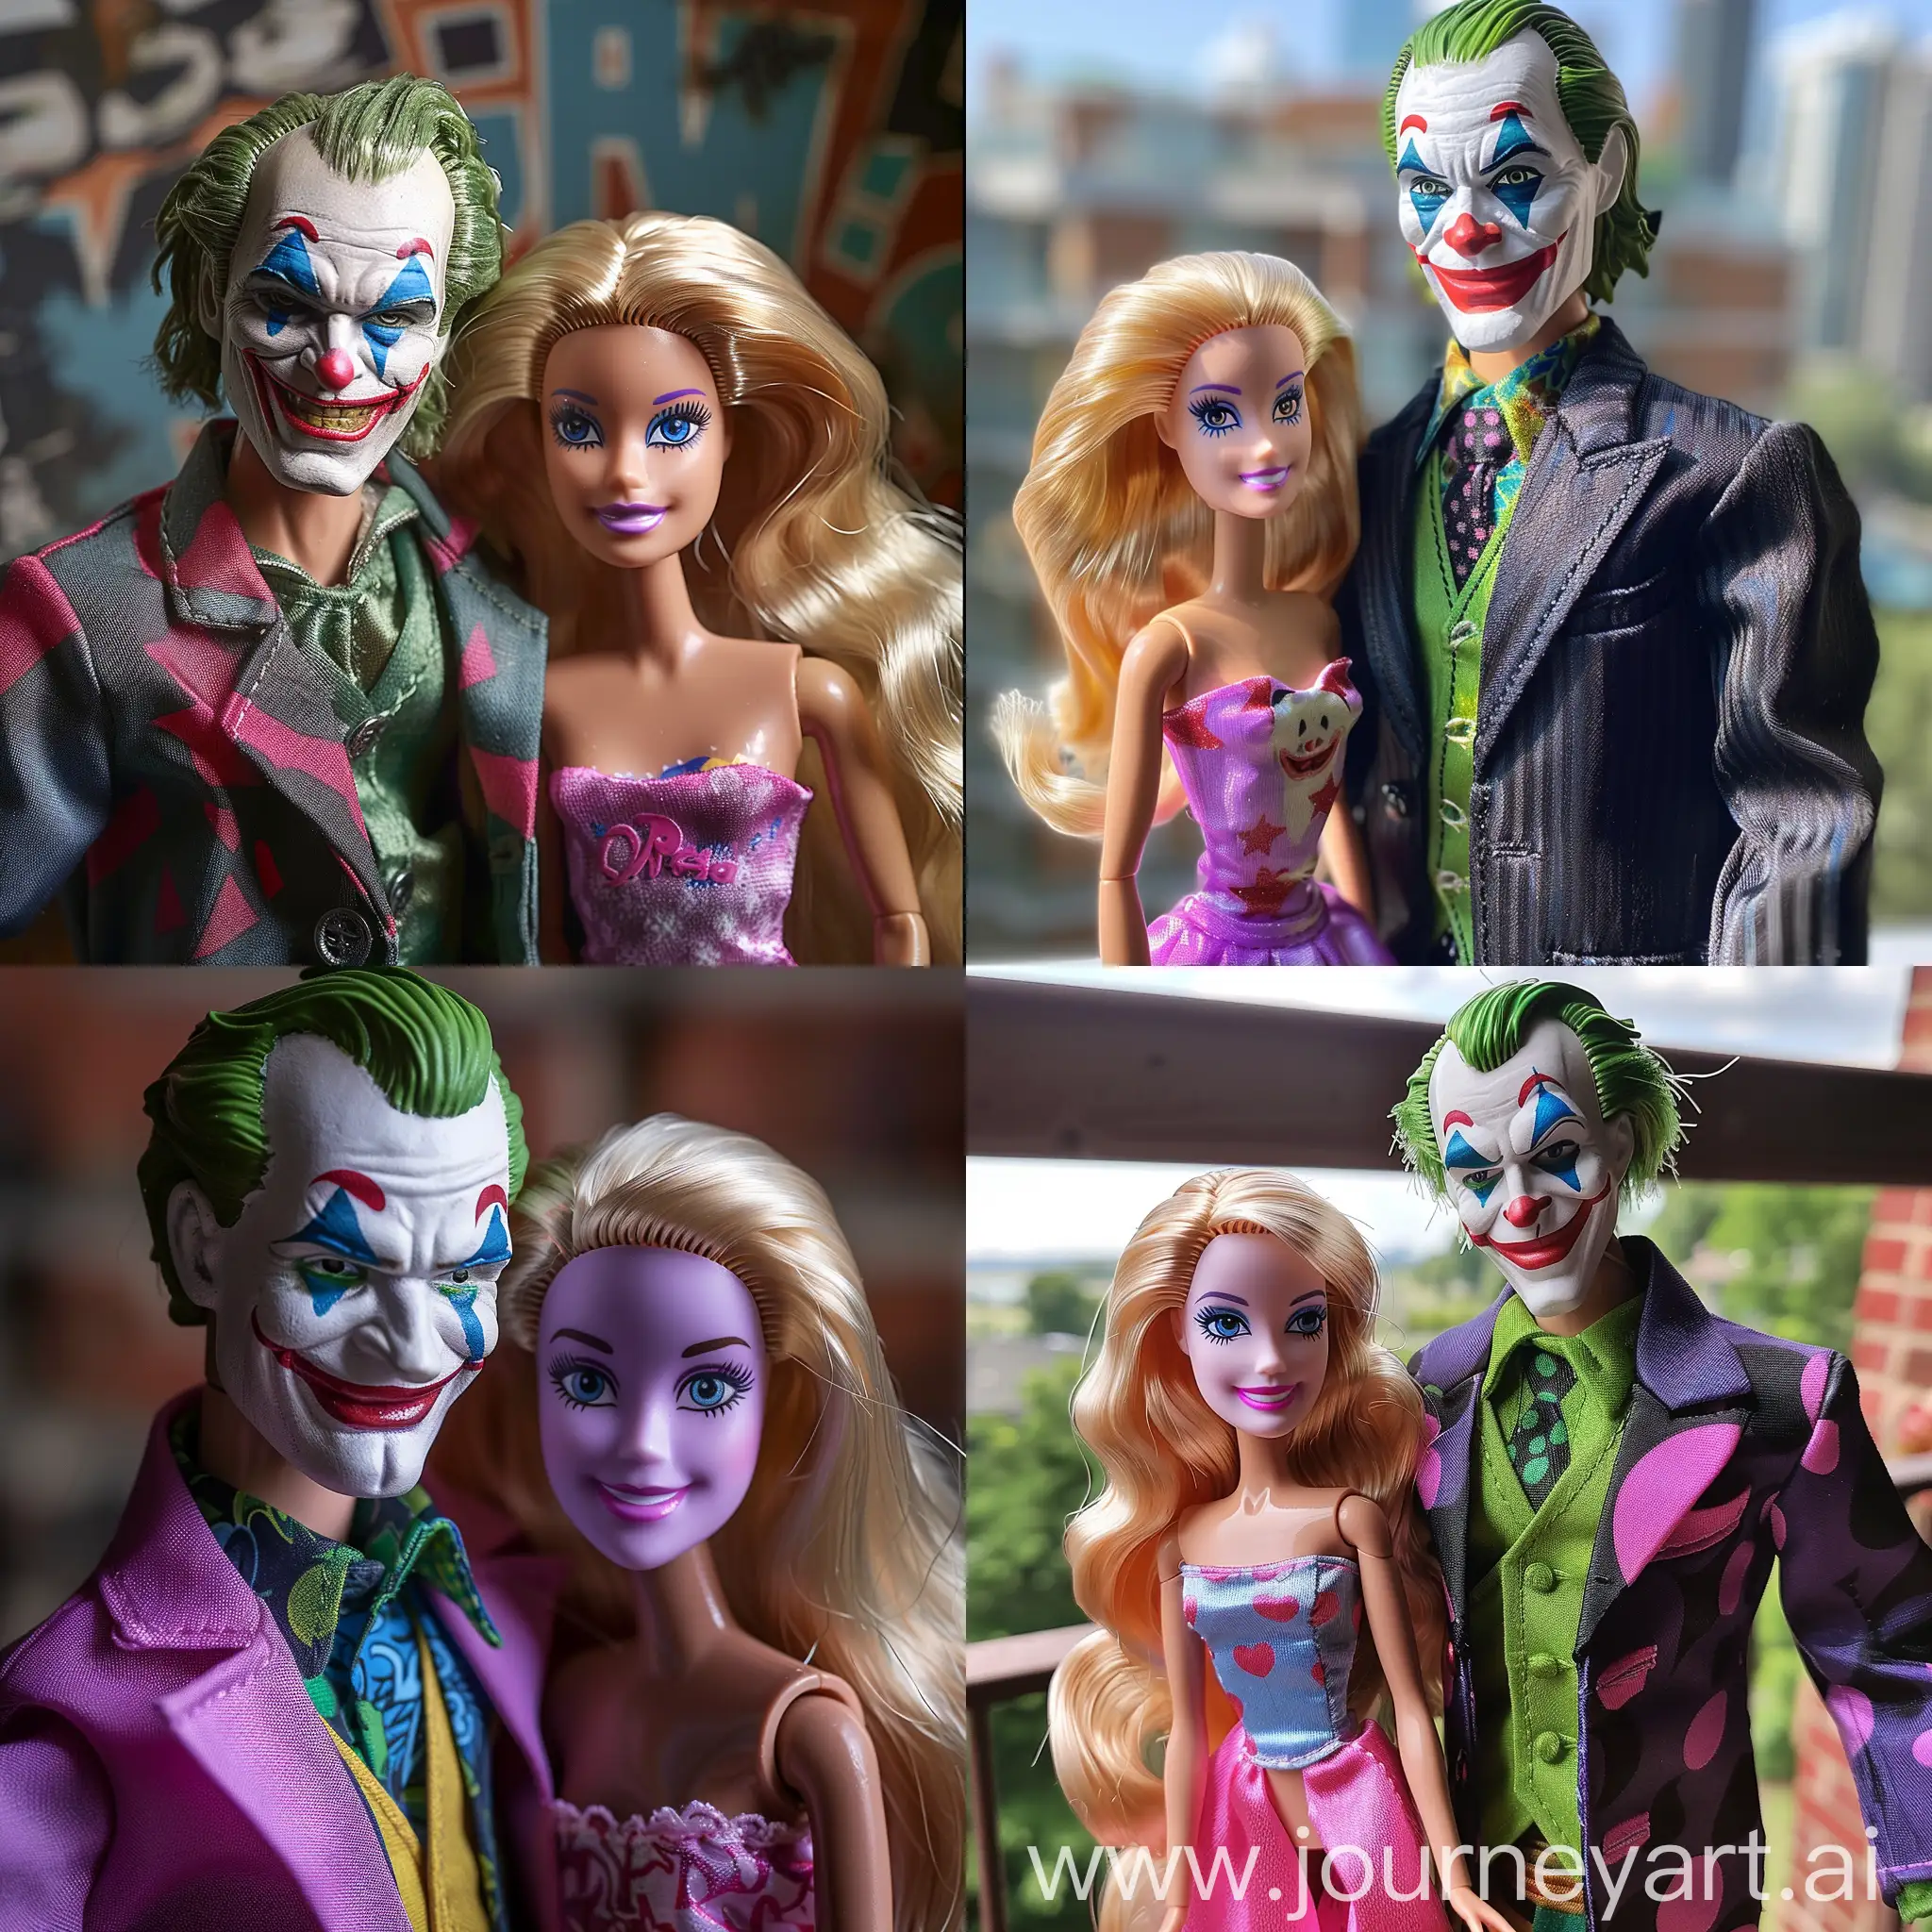 Playful-Interaction-between-Joker-and-Barbie-Doll-in-Vibrant-Setting